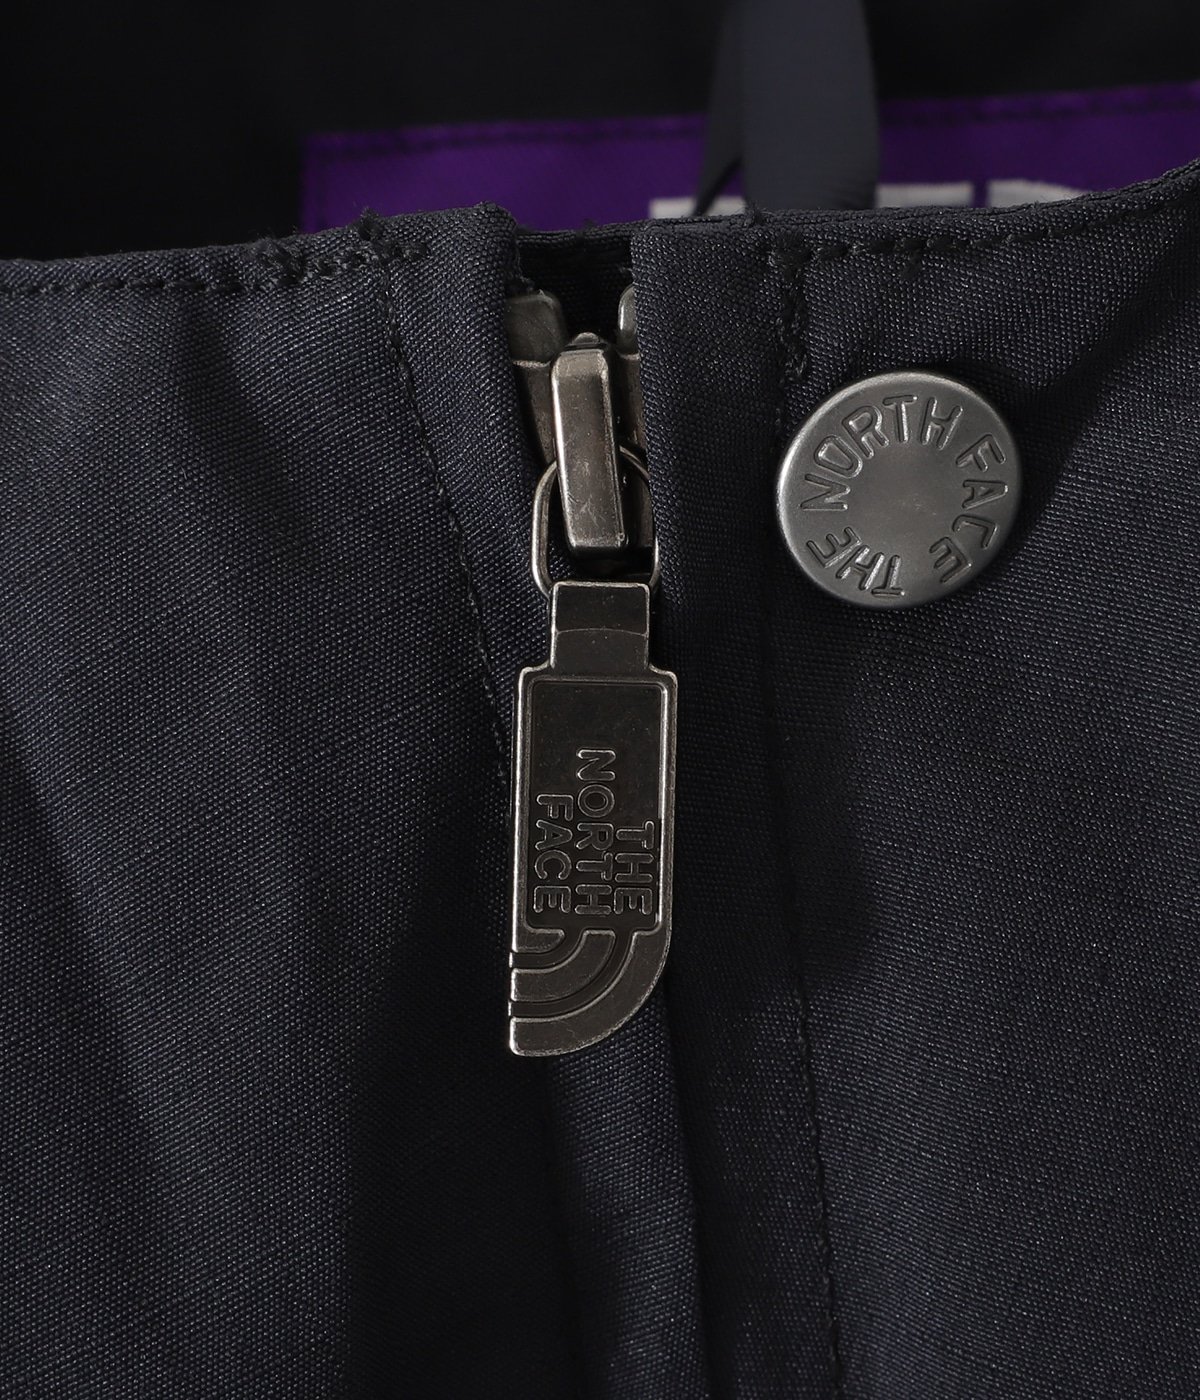 Mountain Wind Parka | THE NORTH FACE PURPLE LABEL(ザ ノース